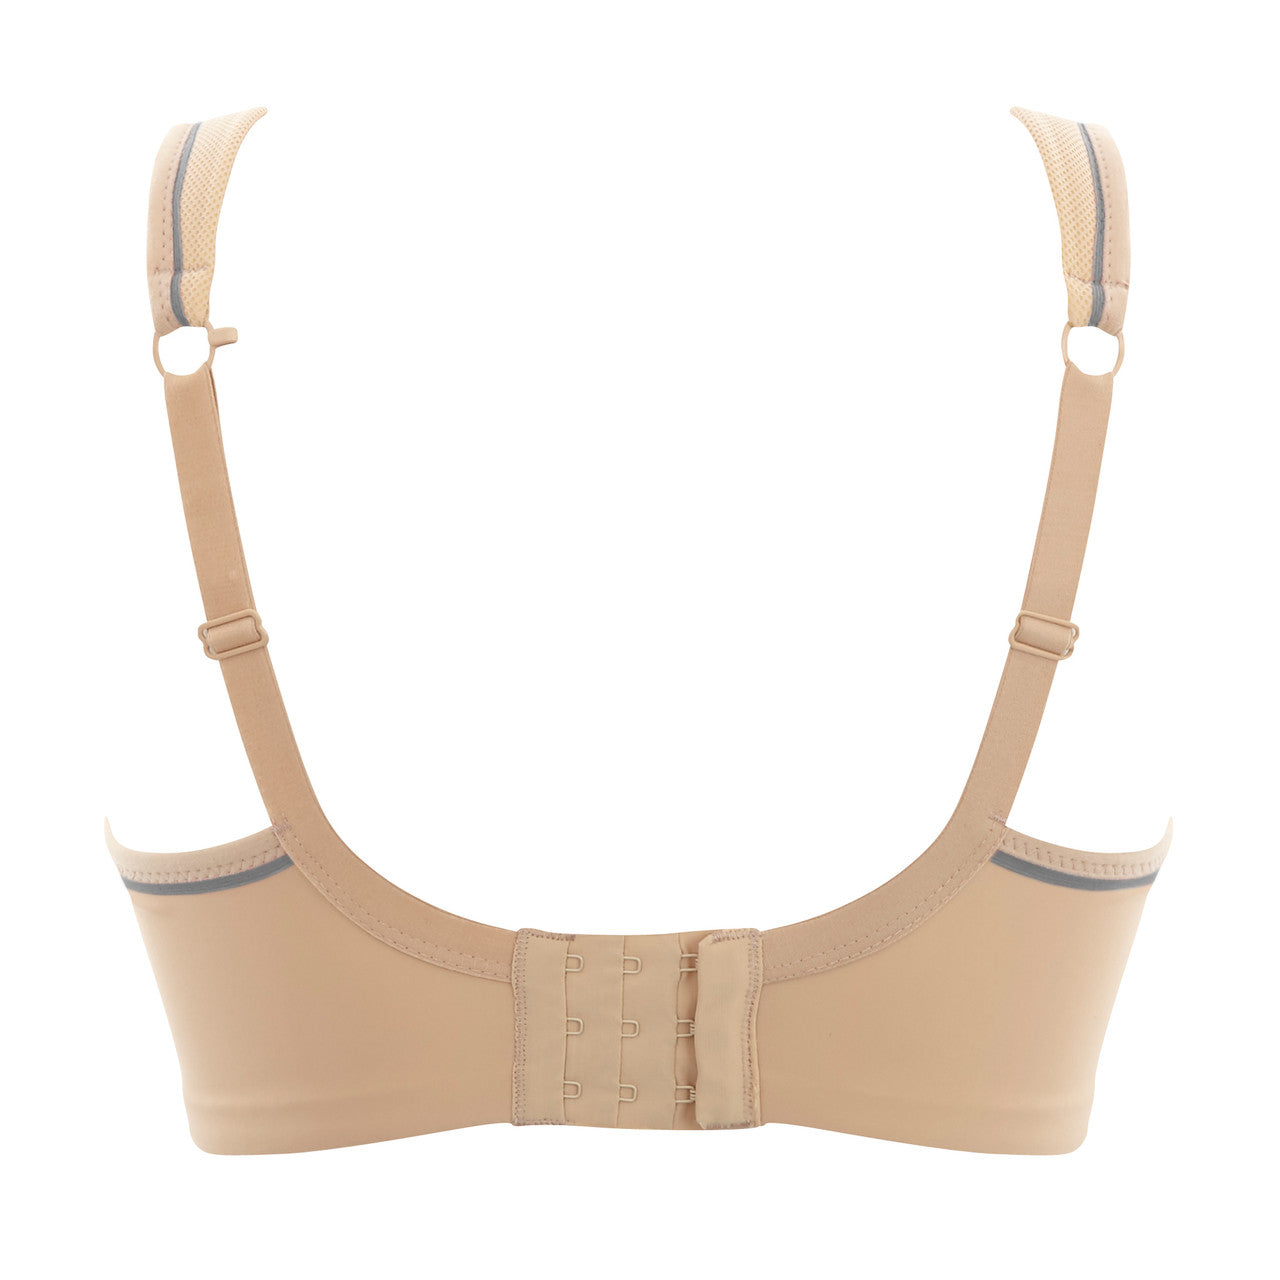 Panache Wired Sports Bra over shoulder strap view of product photo.